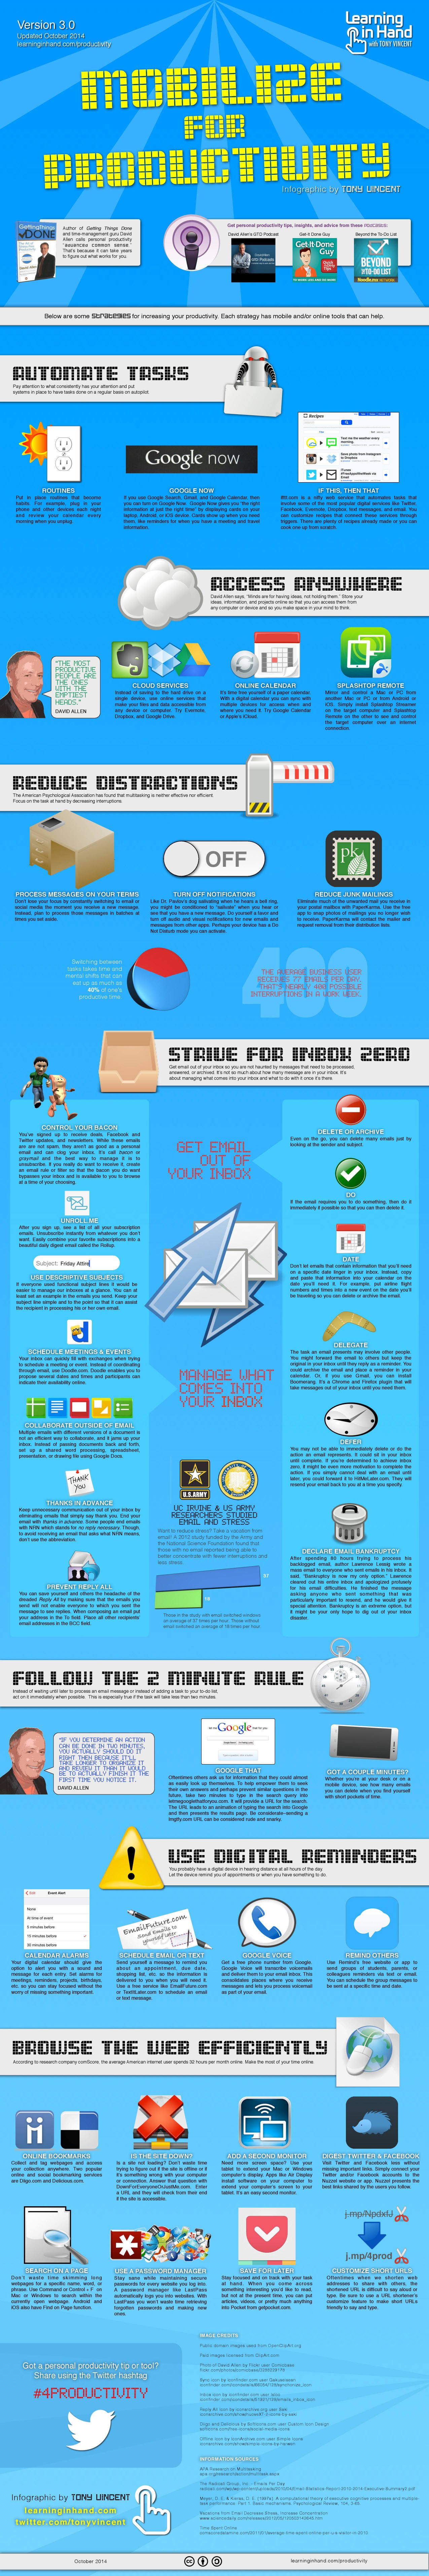 Mobilize for Productivity Infographic